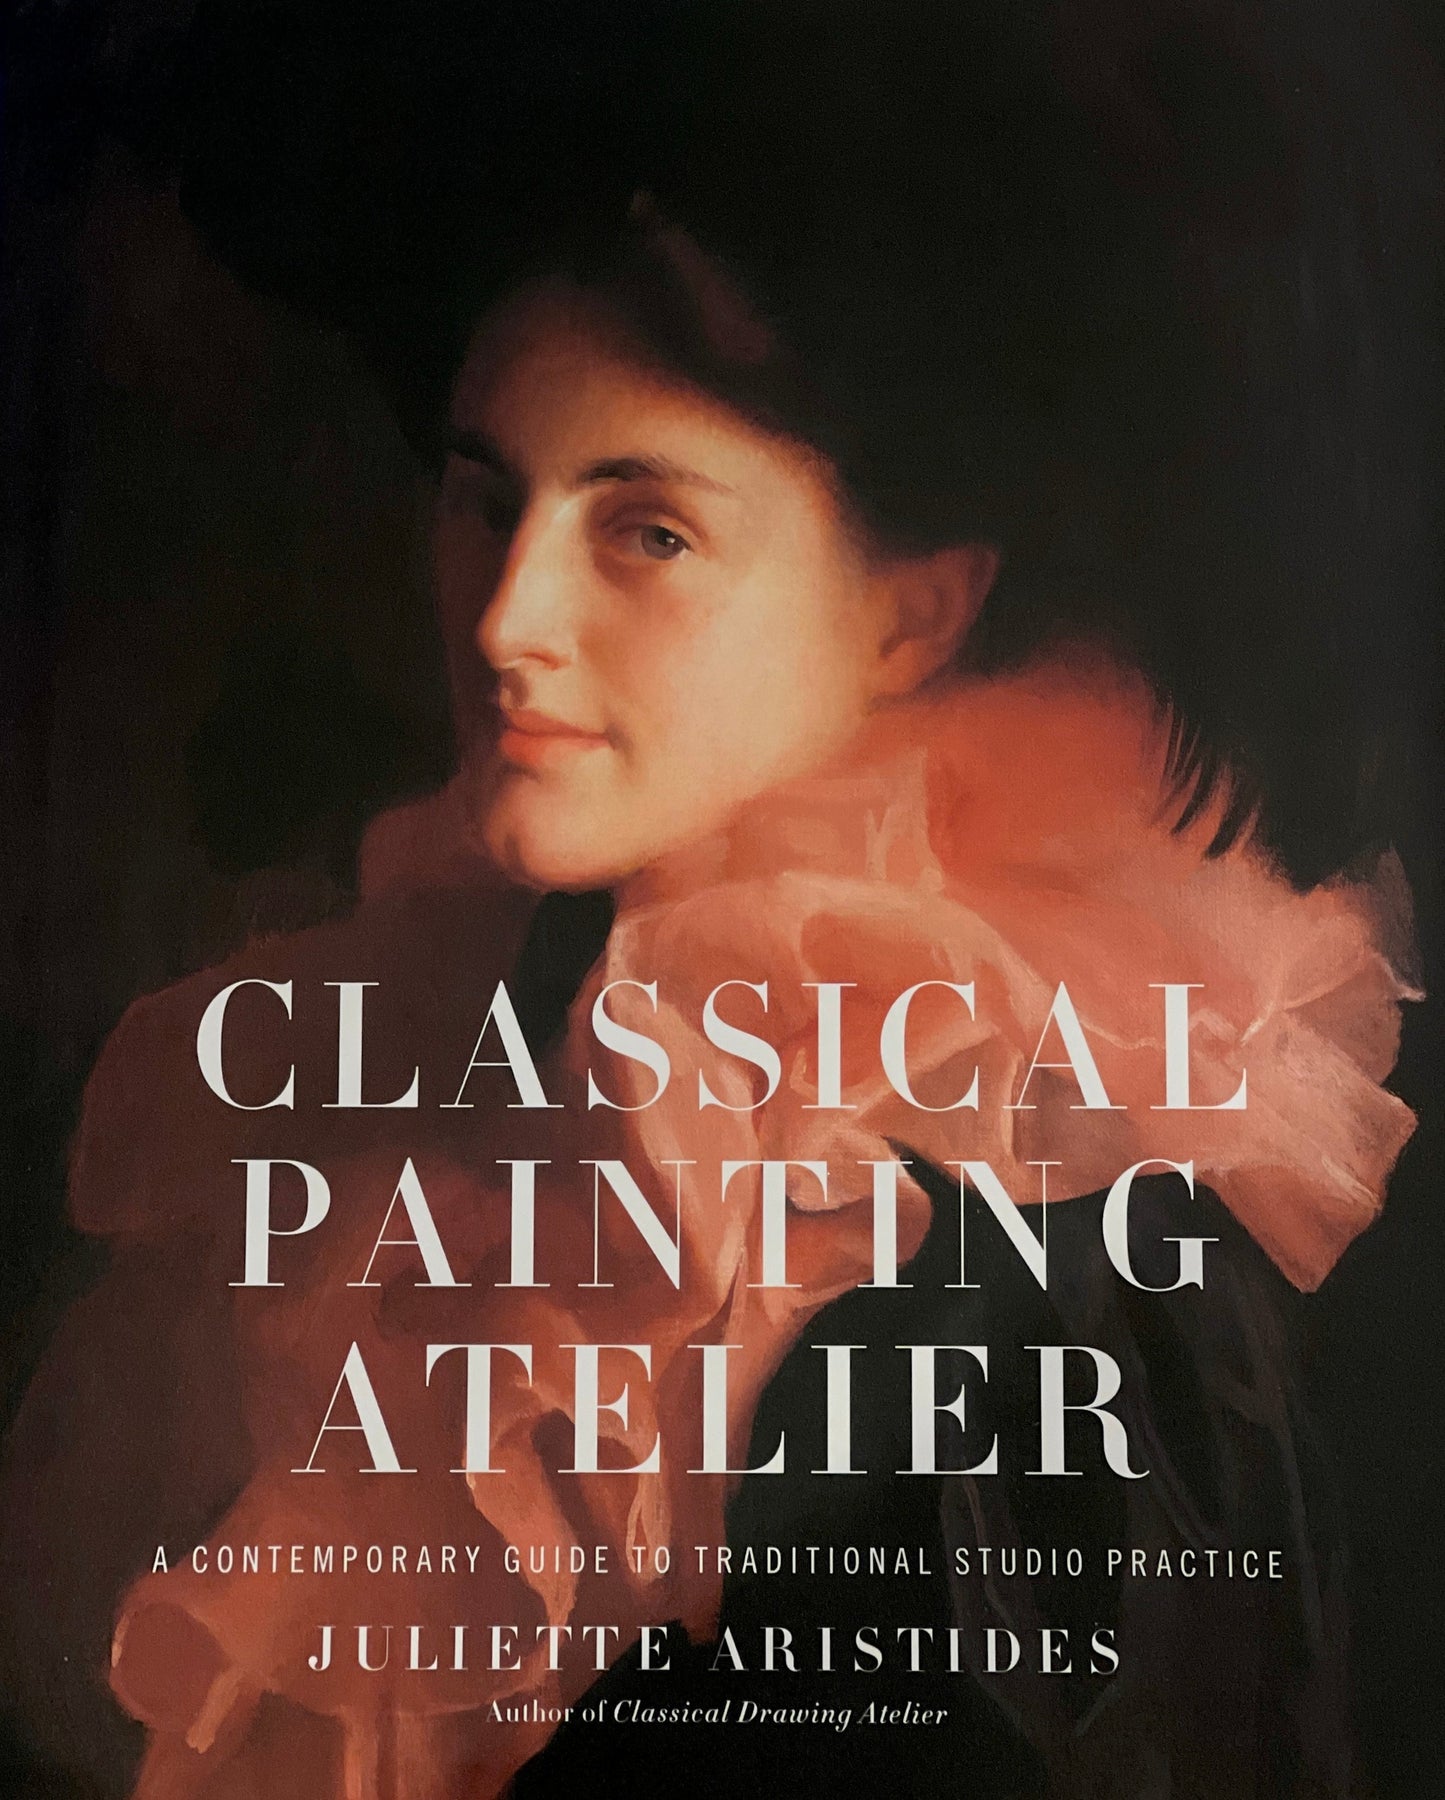 Aristides, Juliette "Classical Painting Atelier: A Contemporary Guide to Traditional Studio Practice"